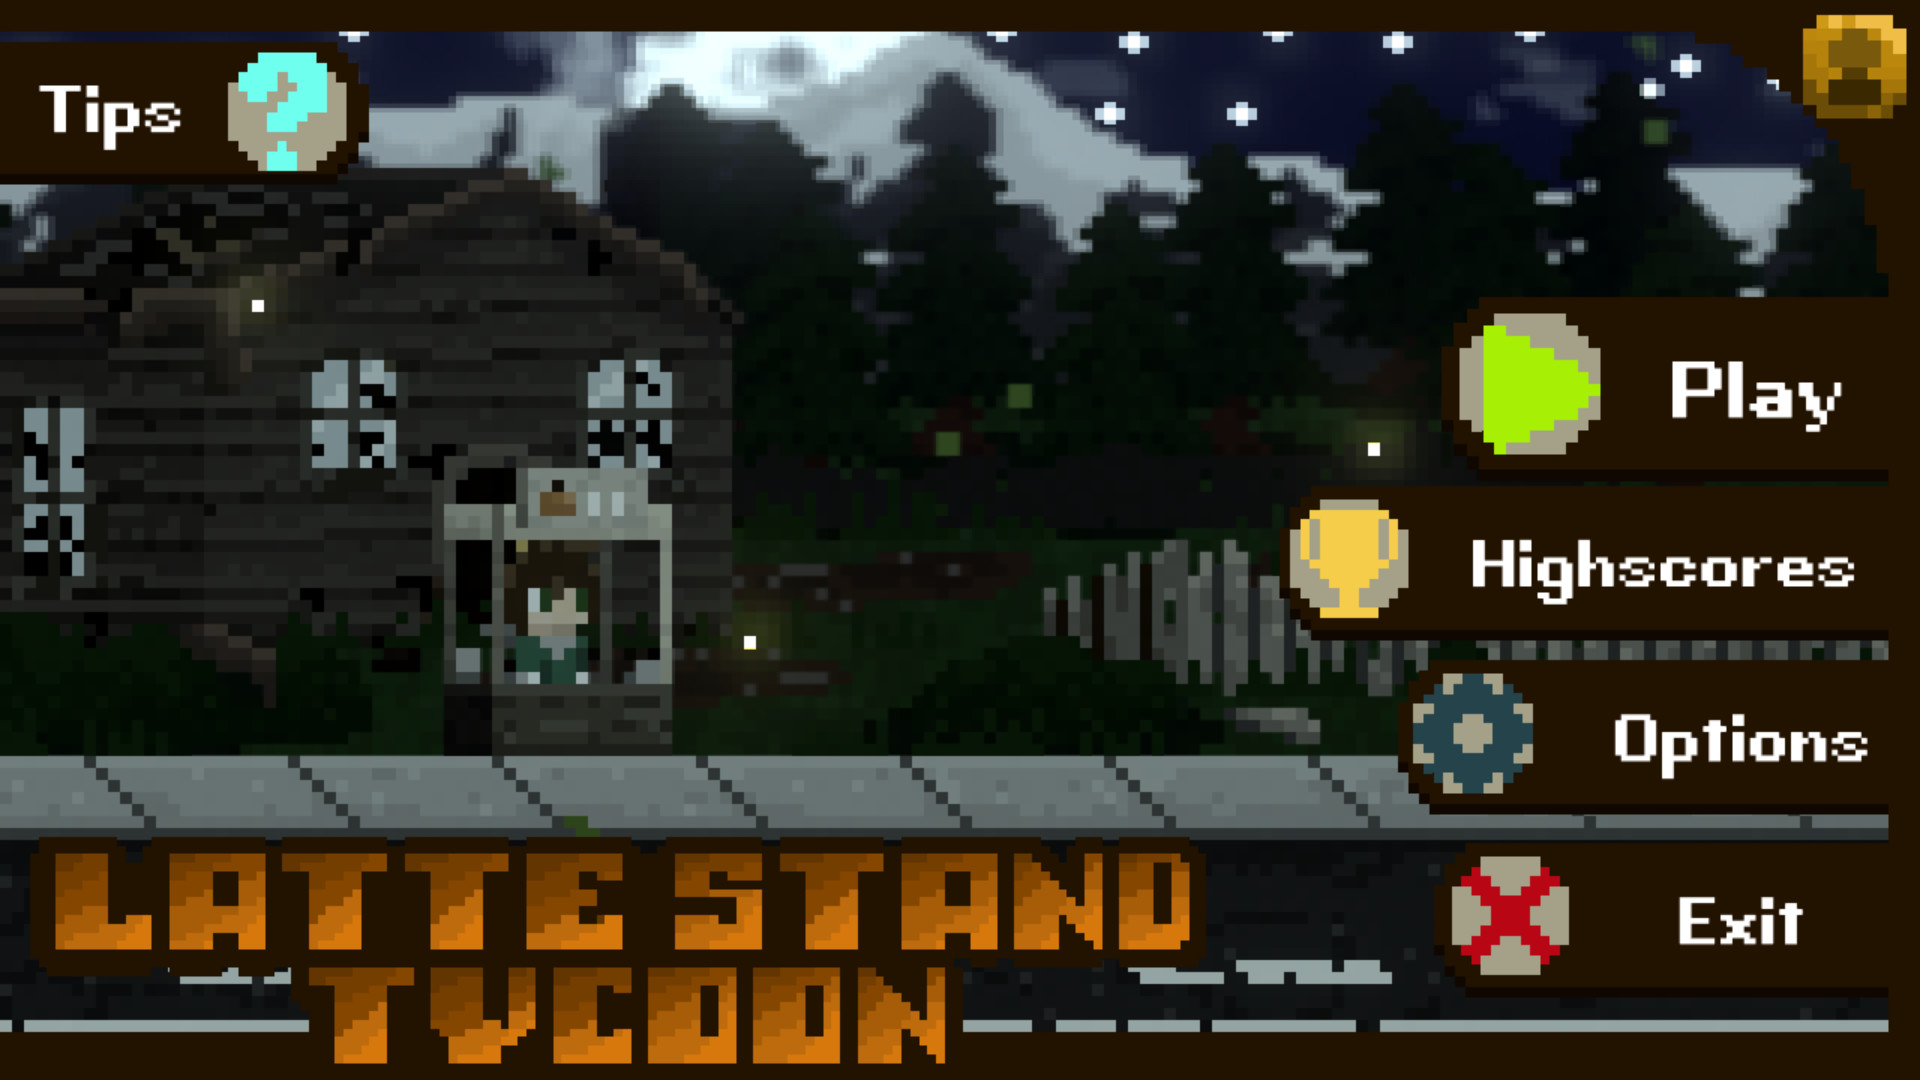 Latte Stand Tycoon Steam CD Key, 0.7 usd